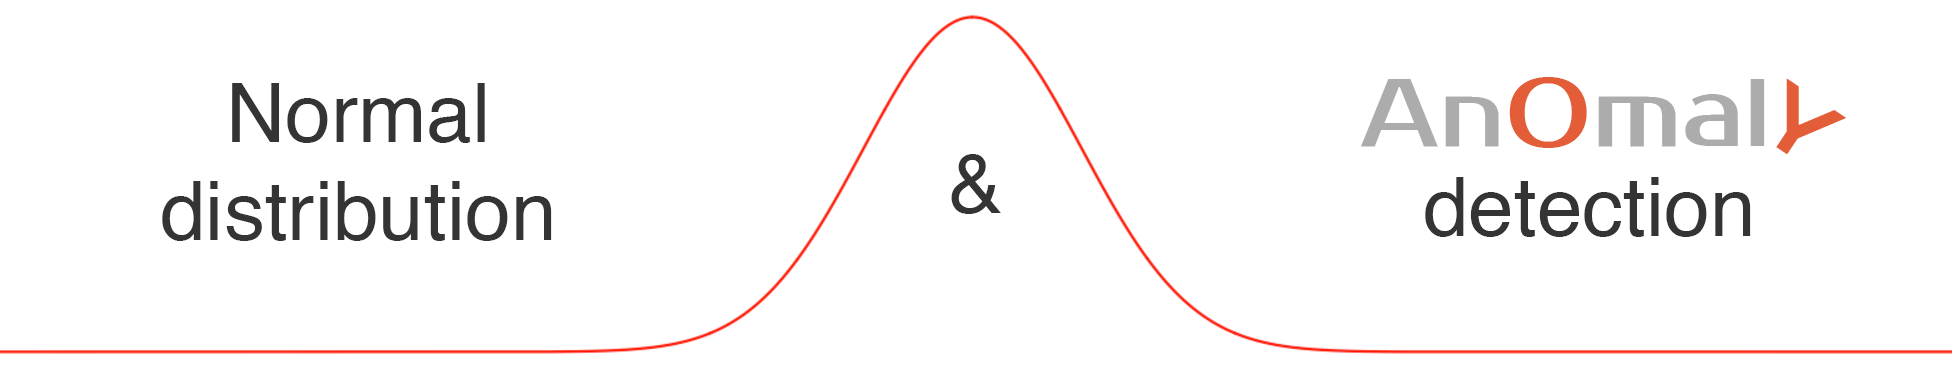 anomaly in normal distribution